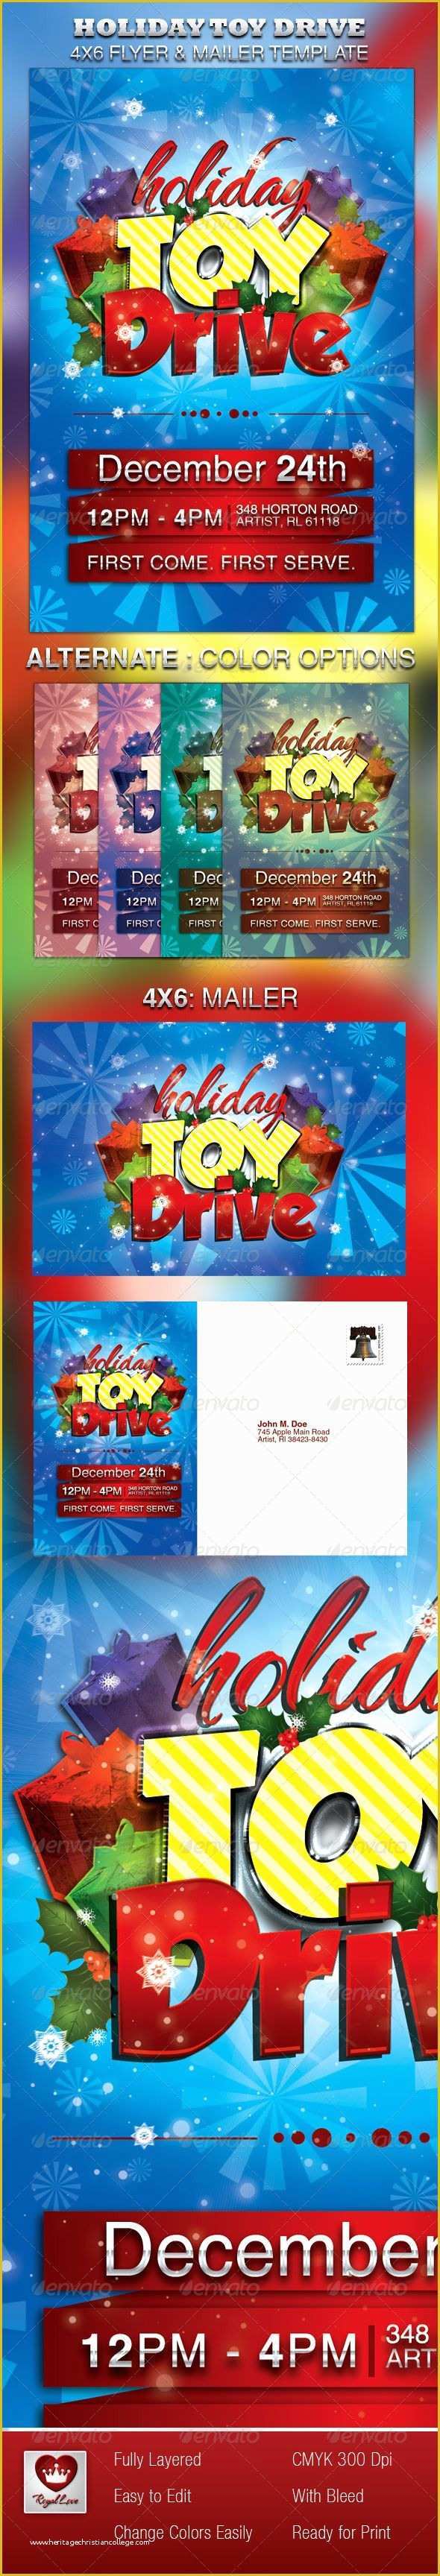 Holiday toy Drive Flyer Template Free Of Holiday toy Drive Flyer & Mailer